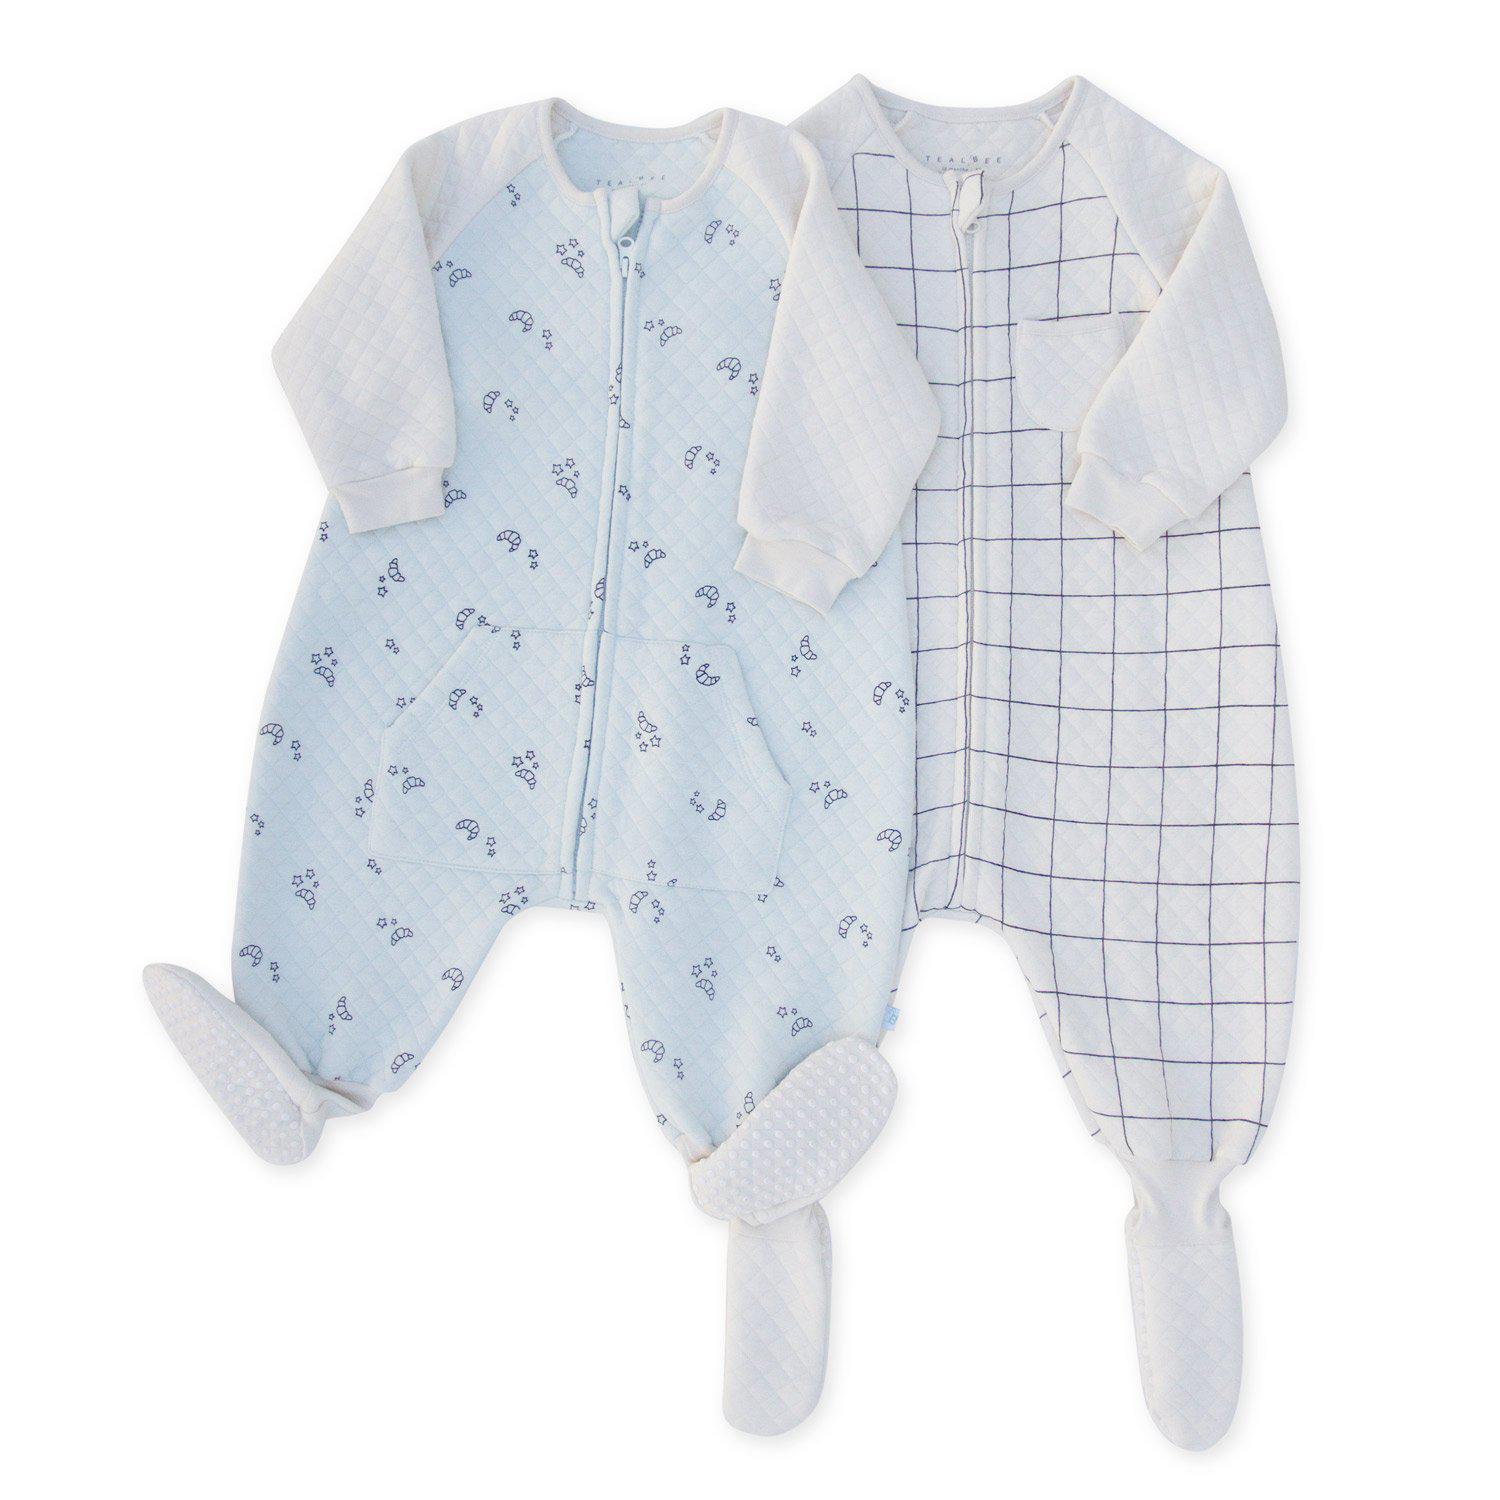 Tealbee Dreamsie with sleeves and footies, sizes available 12m to 4T - product flatlay view showing two designs (Croissant and Checkered)